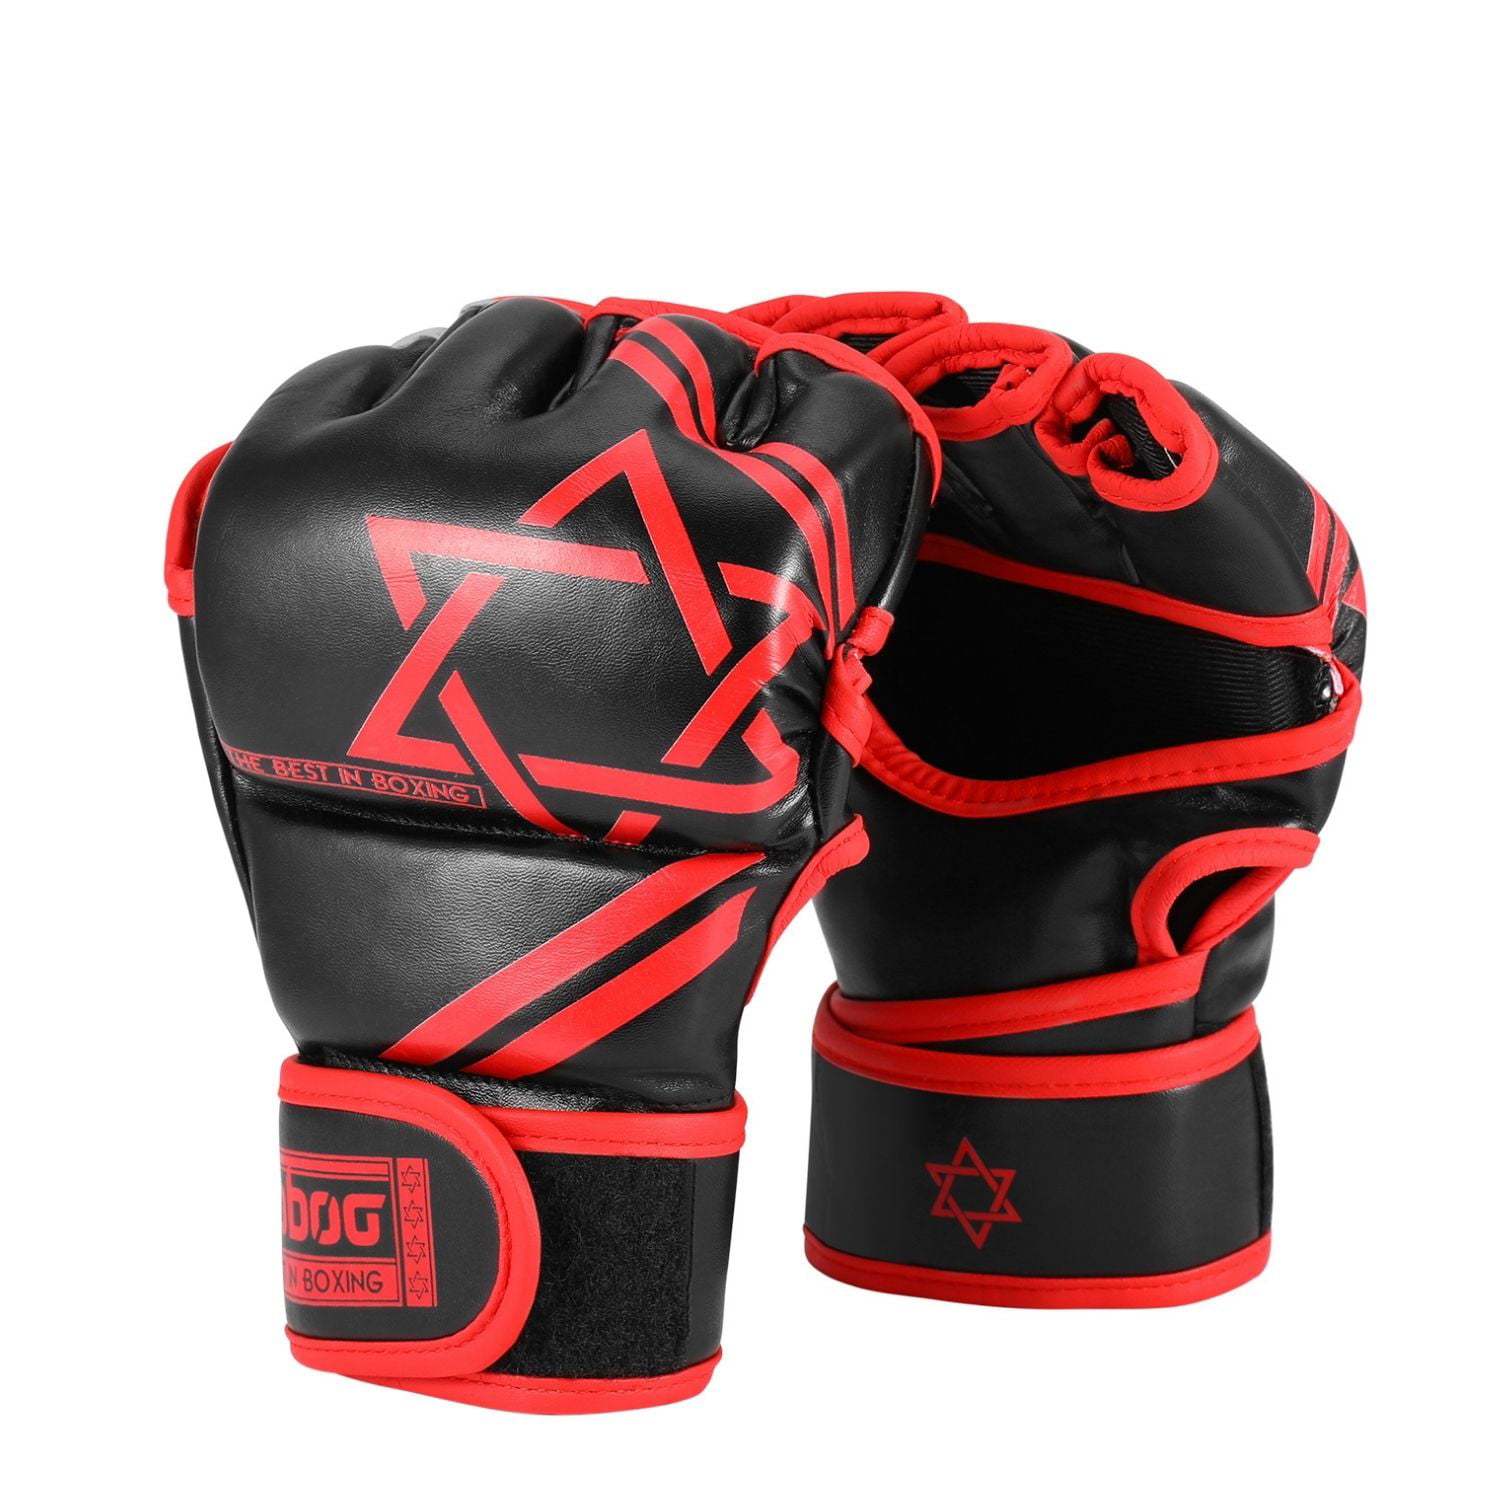 RED MMA GLOVES GRAPPLING PUNCHING BAG TRAINING MARTIAL ARTS SPARRING UFC BOXING 